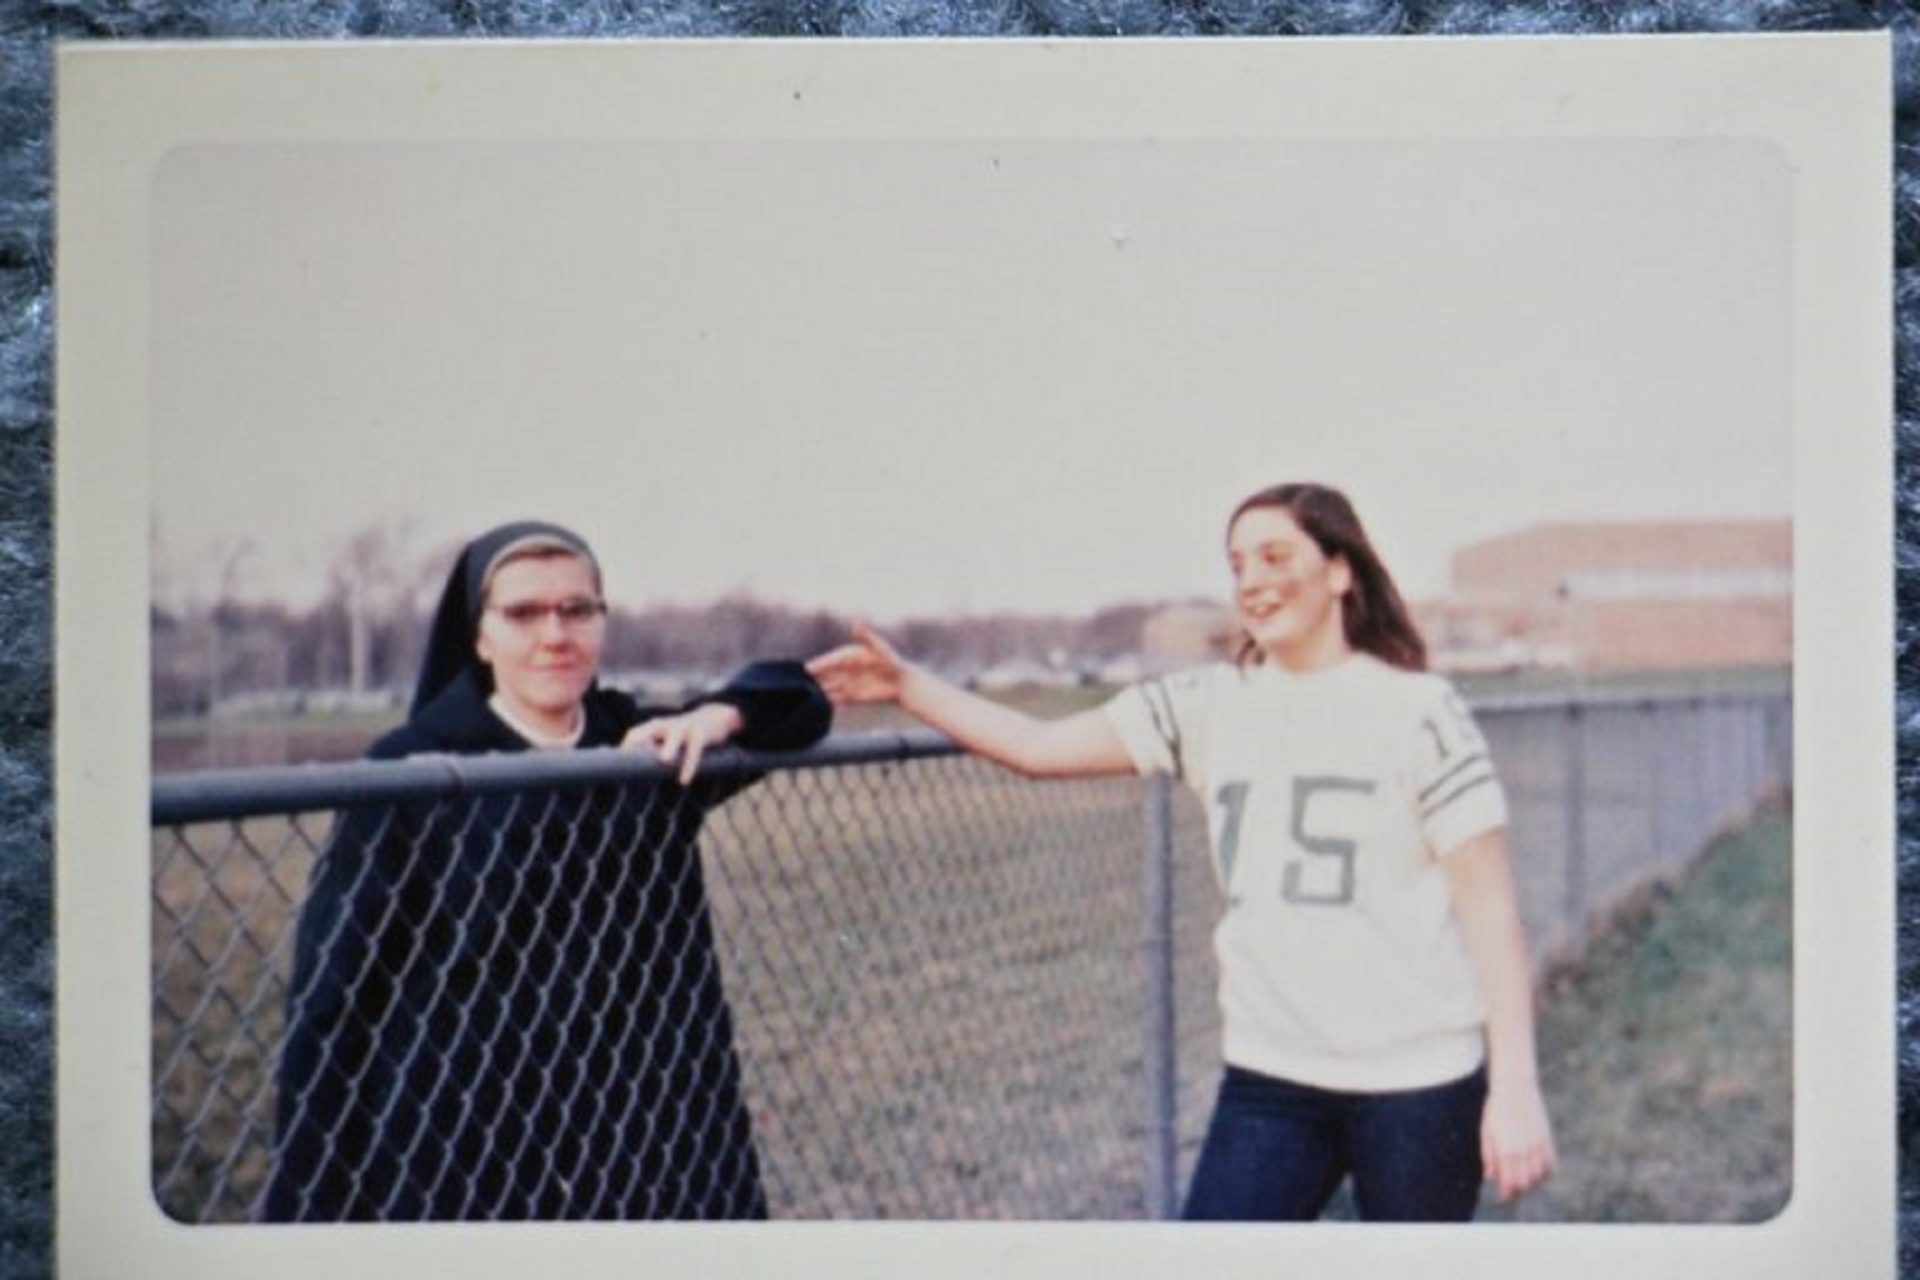 Patricia Cahill (right) greets Sister Eileen Shaw, the nun she says sexually abused her, at an event at Paramus Catholic High School, Bergen County, N.J. in 1970.